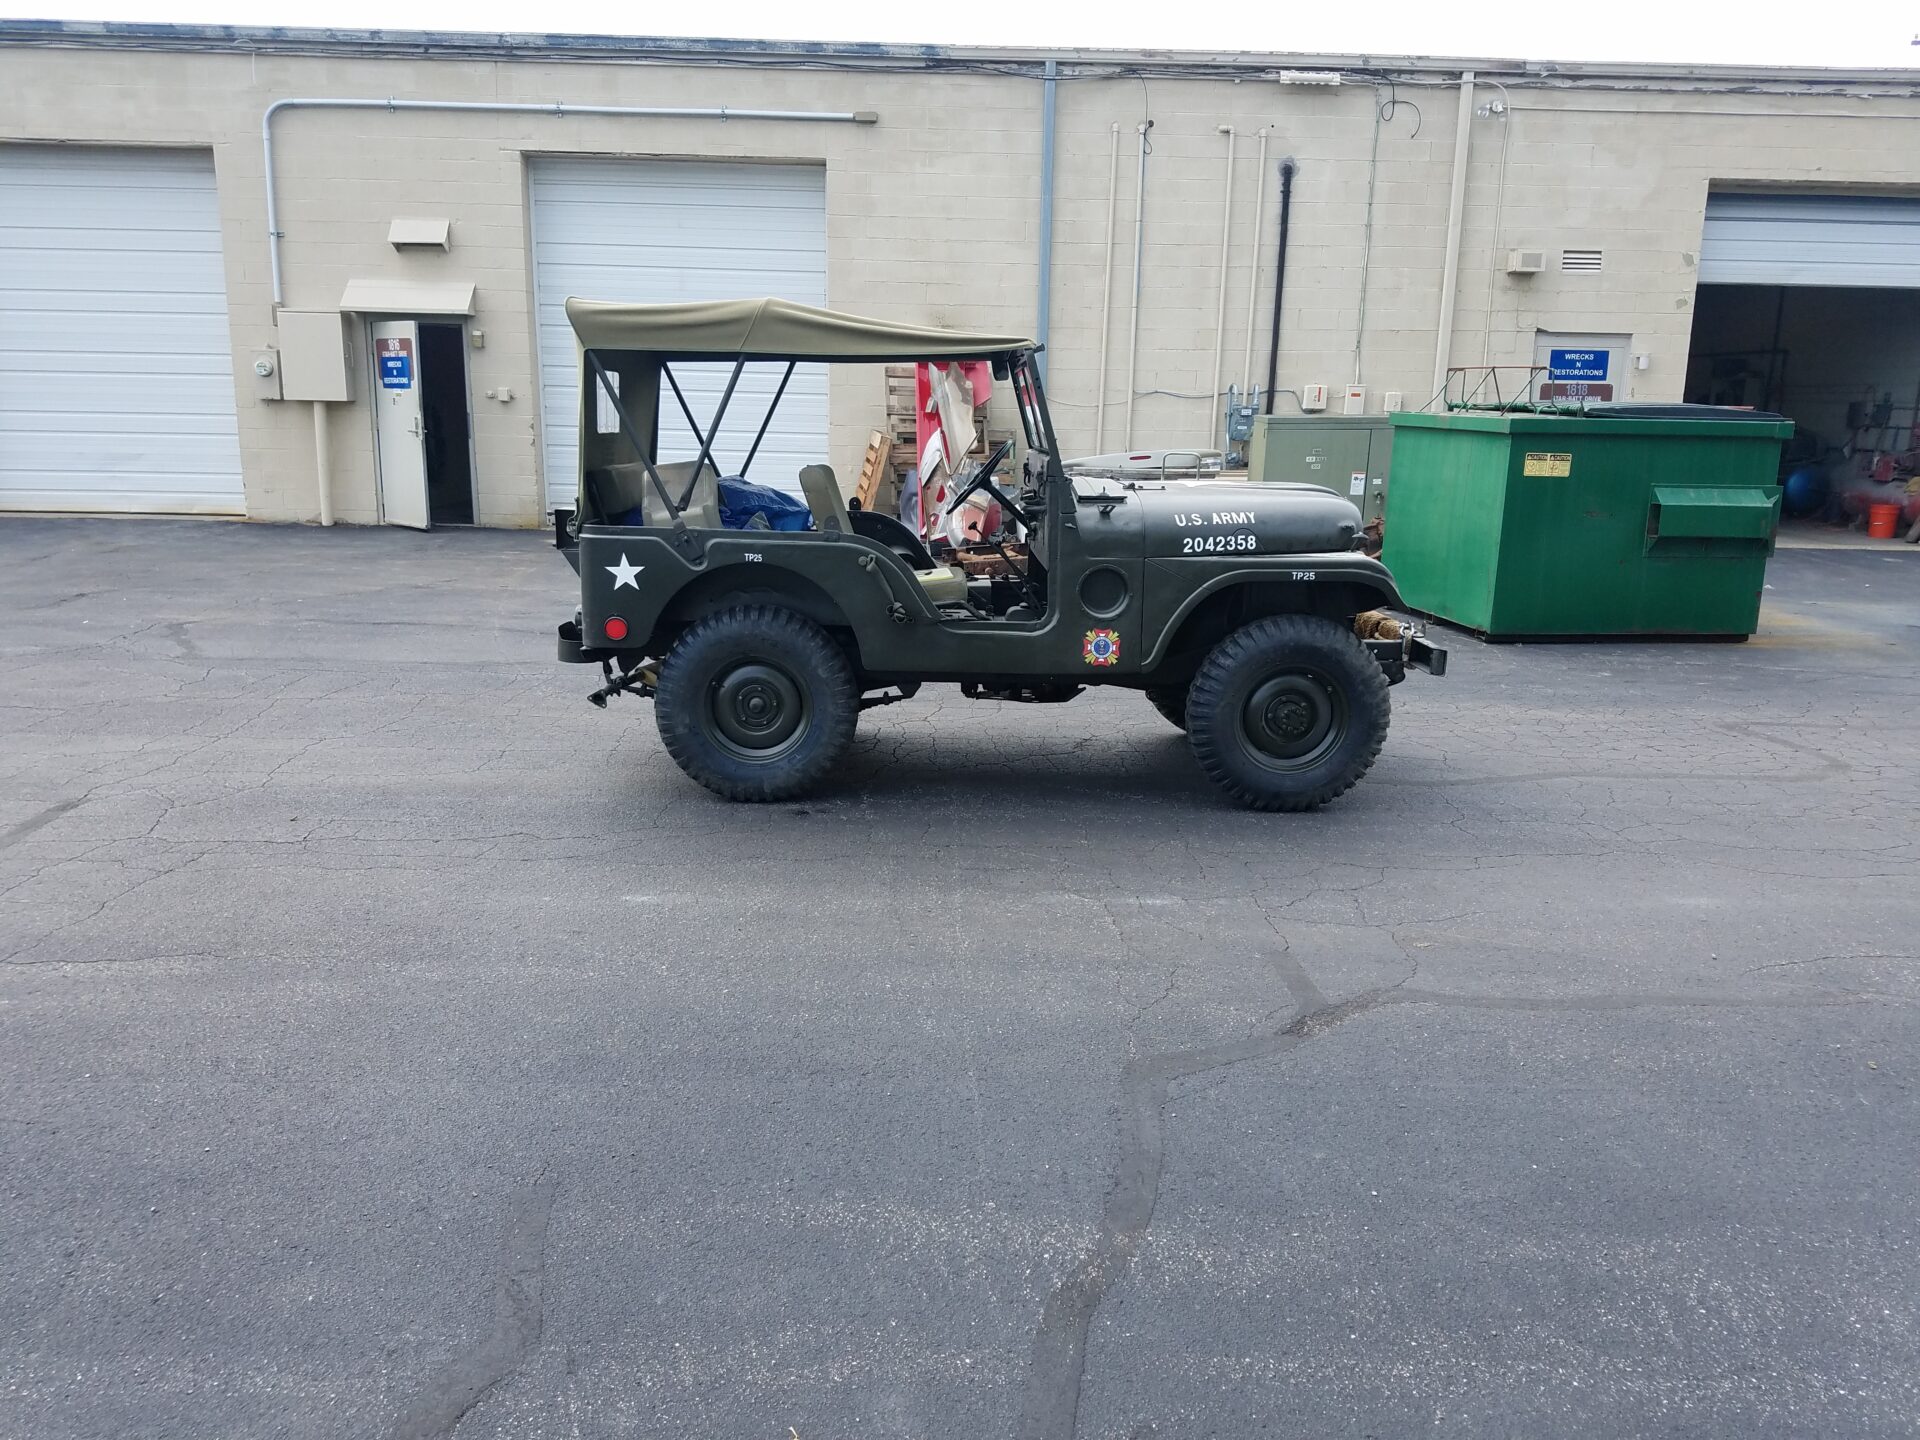 A 1953 Military Jeep model